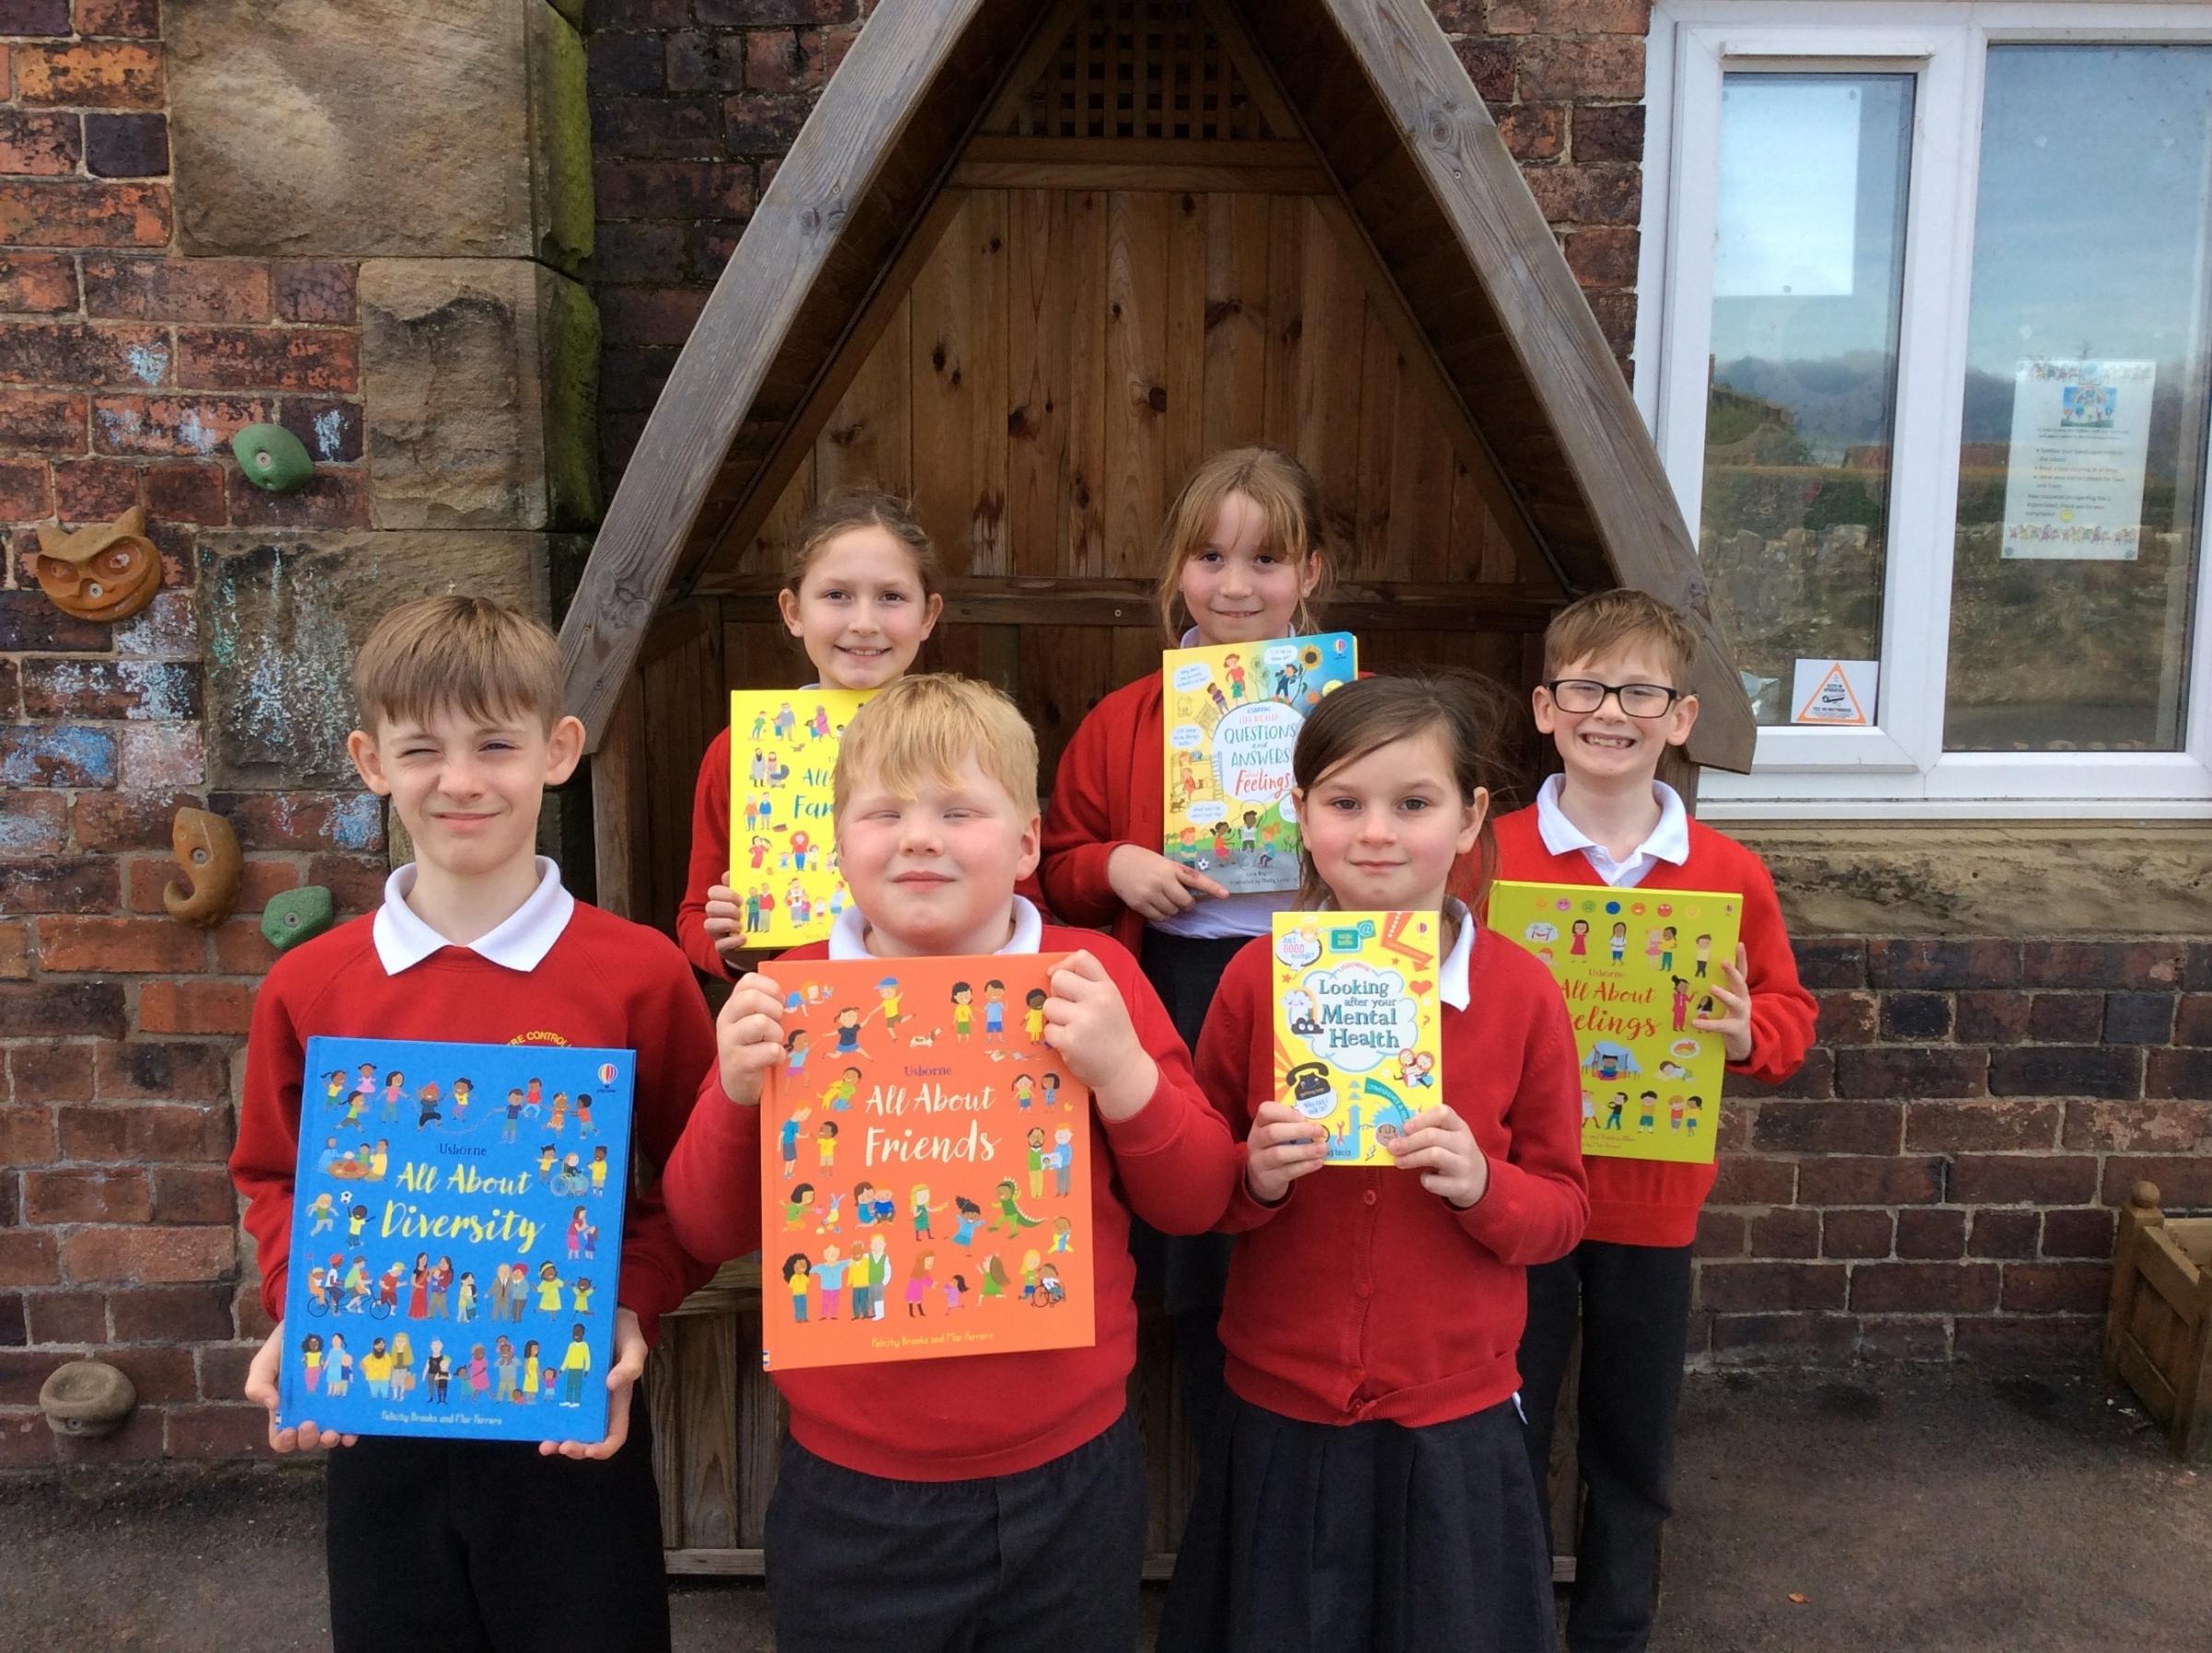 New books at Ysgol Pentre, sponsored by Thermseal-Windows.